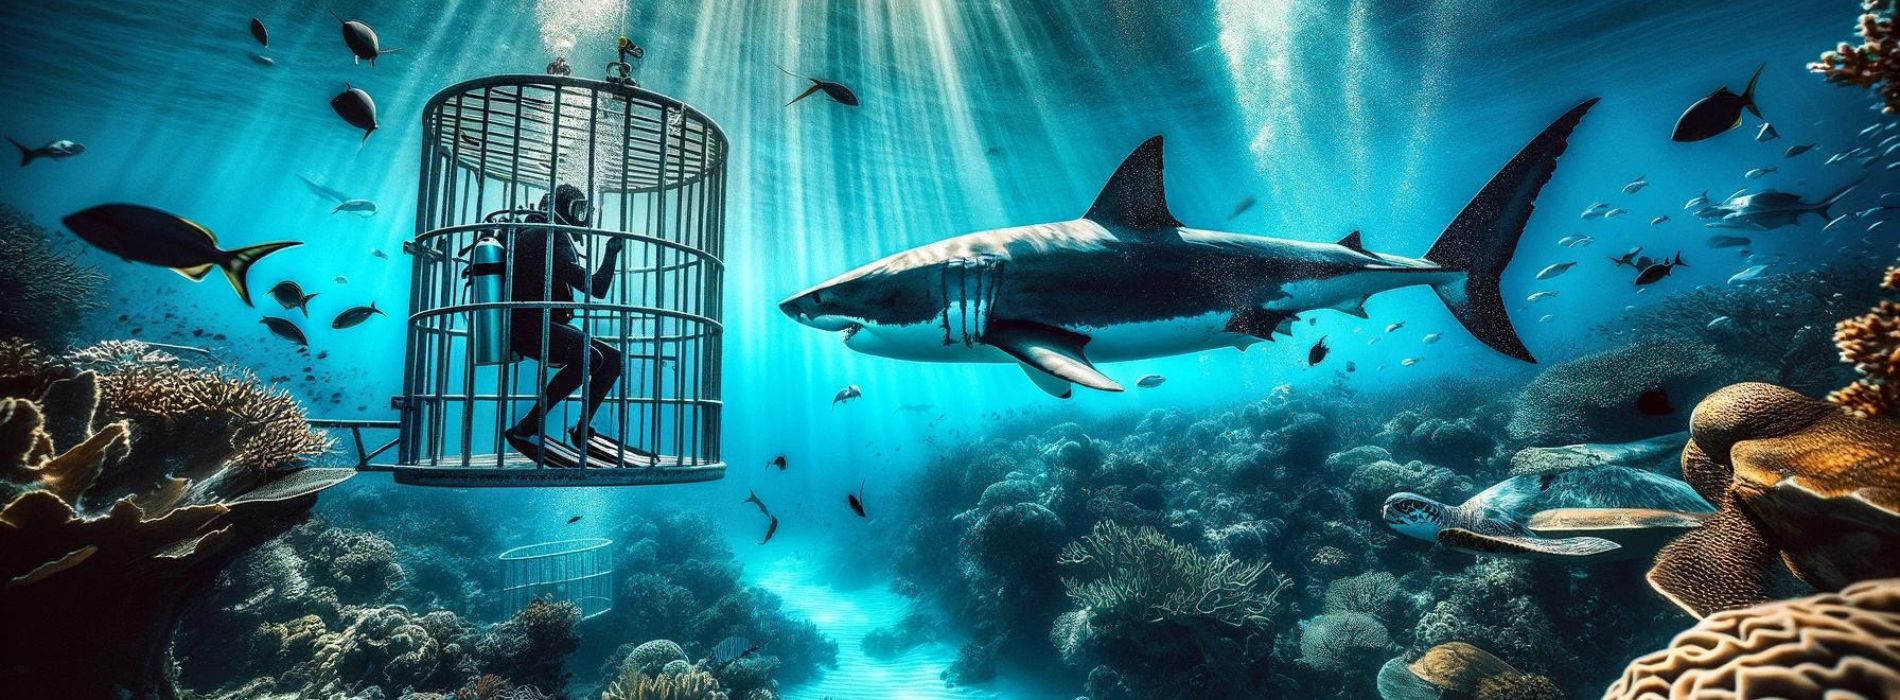 Diver-encounter-a-great-white-shark-in-a-cage